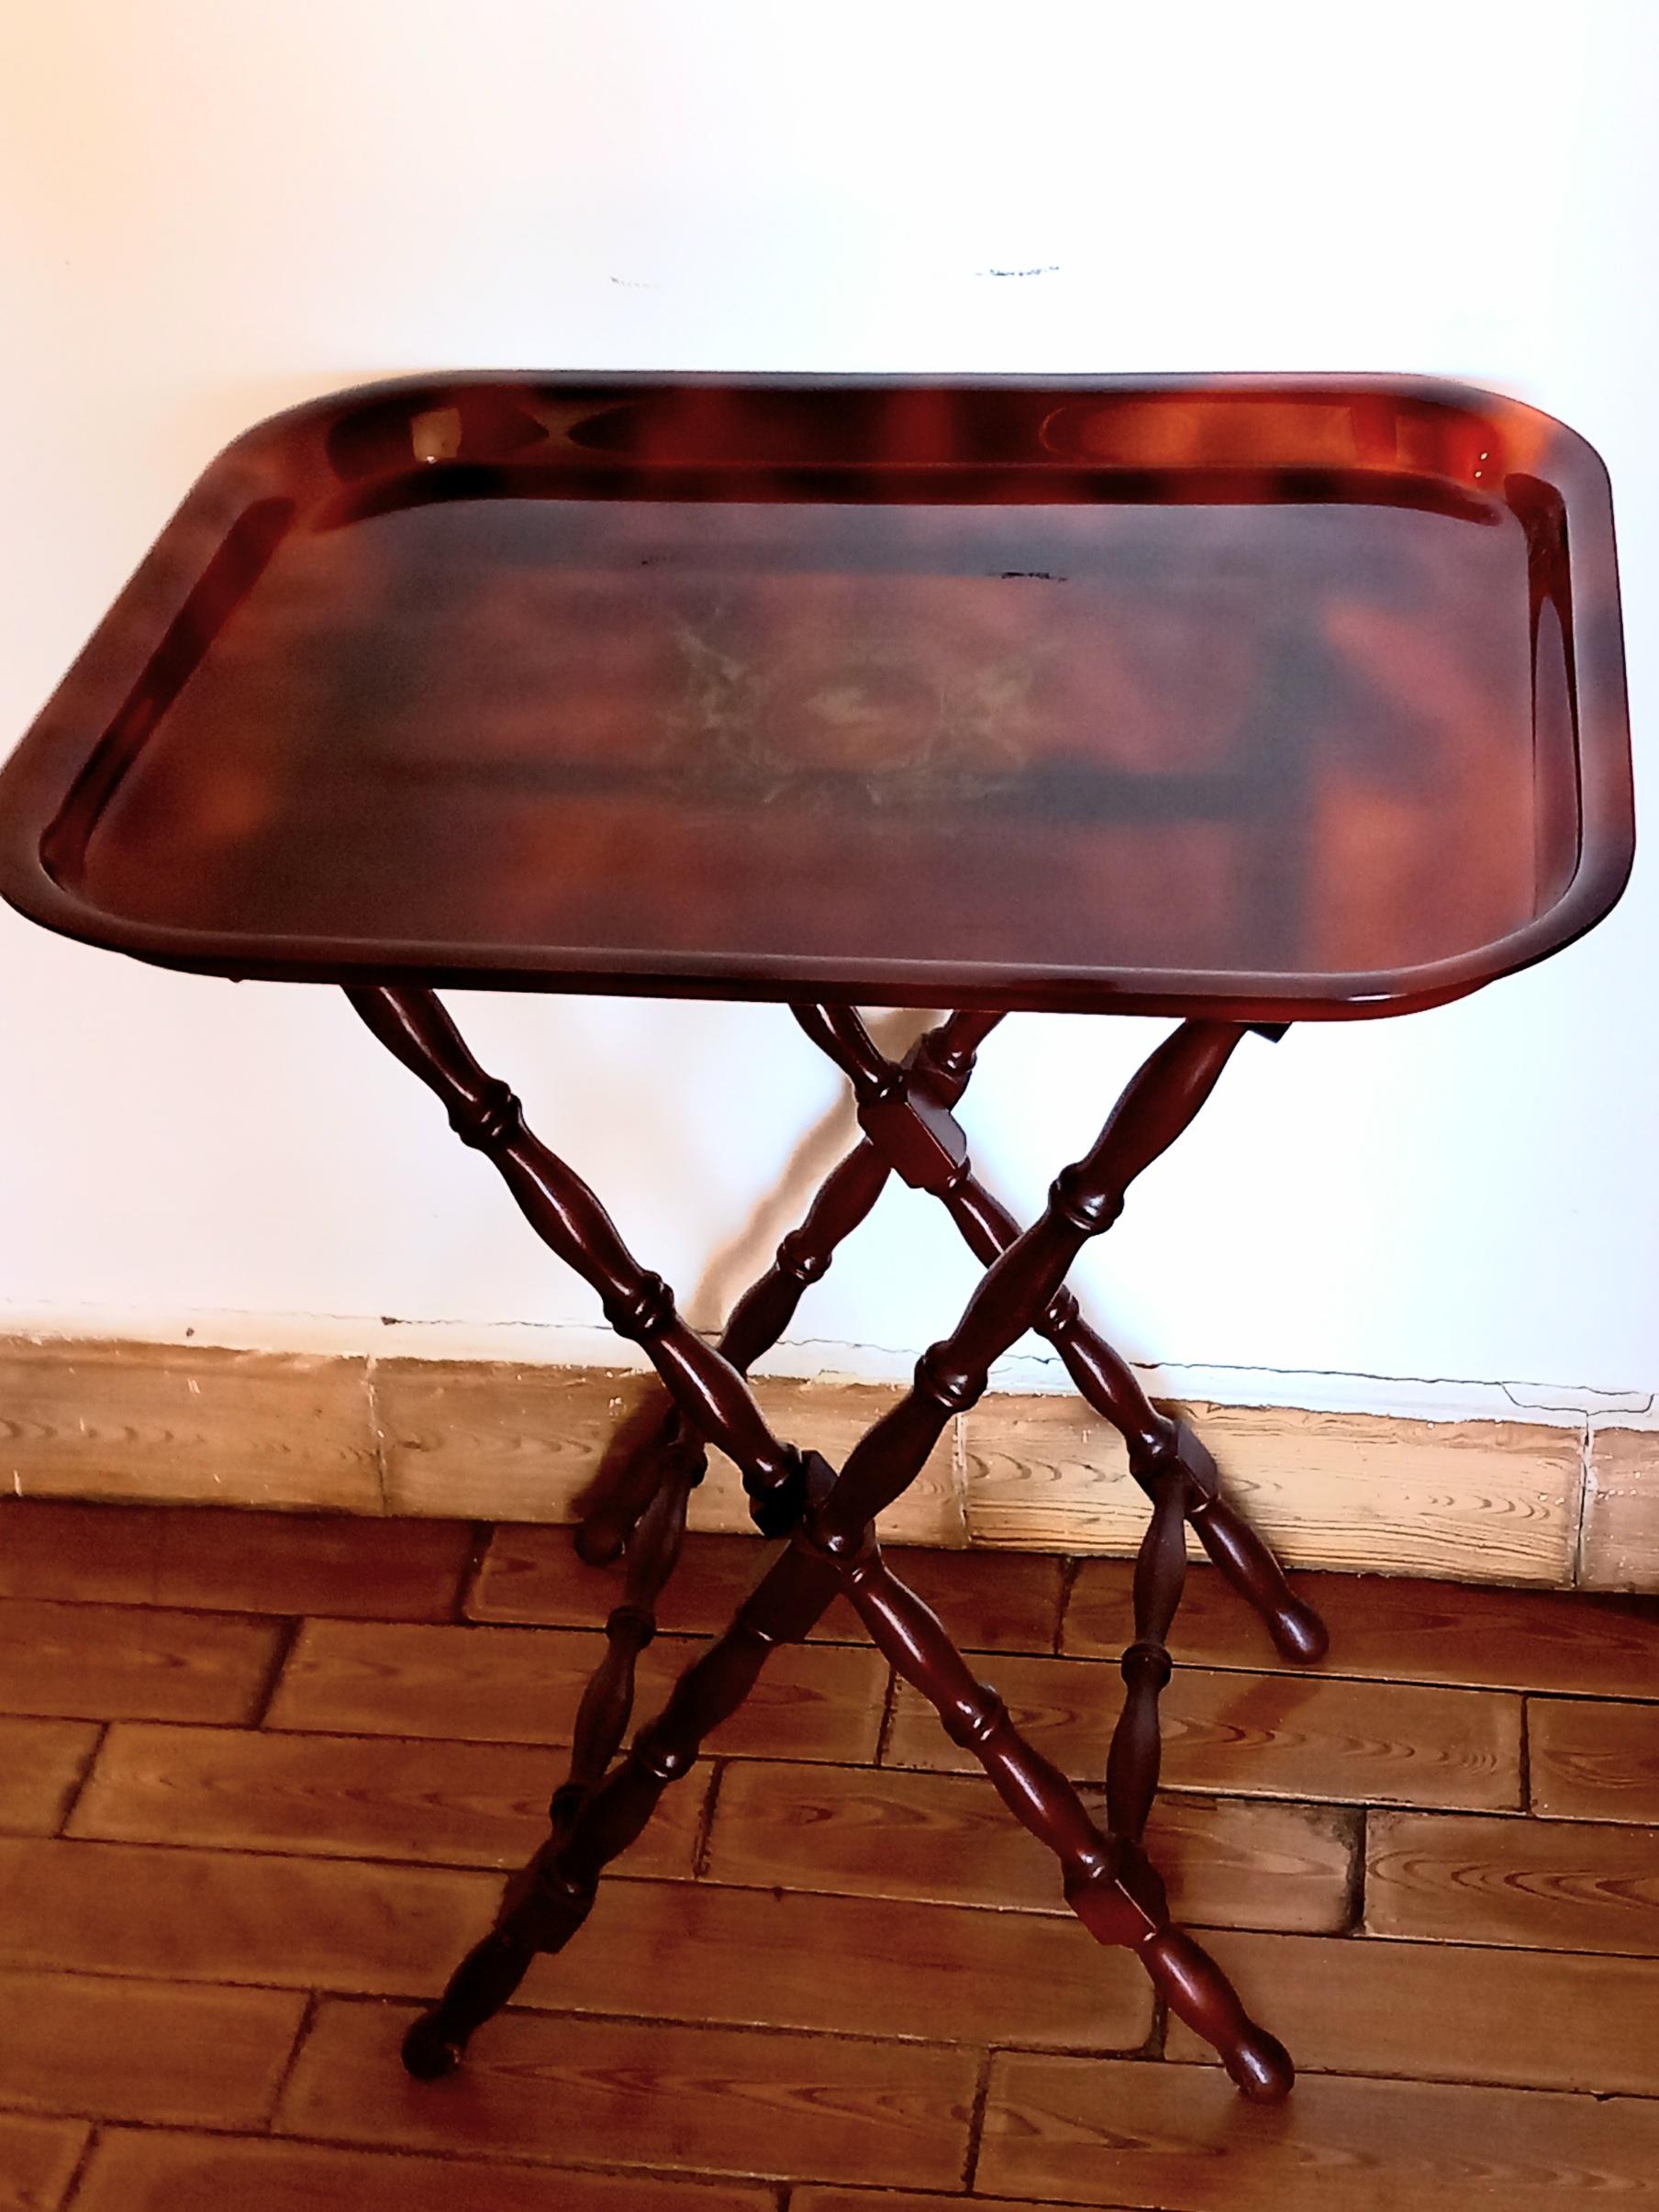 Tray Methacrylate Turtle Shell Design, with Folding Legs Valenti Barcelona For Sale 1